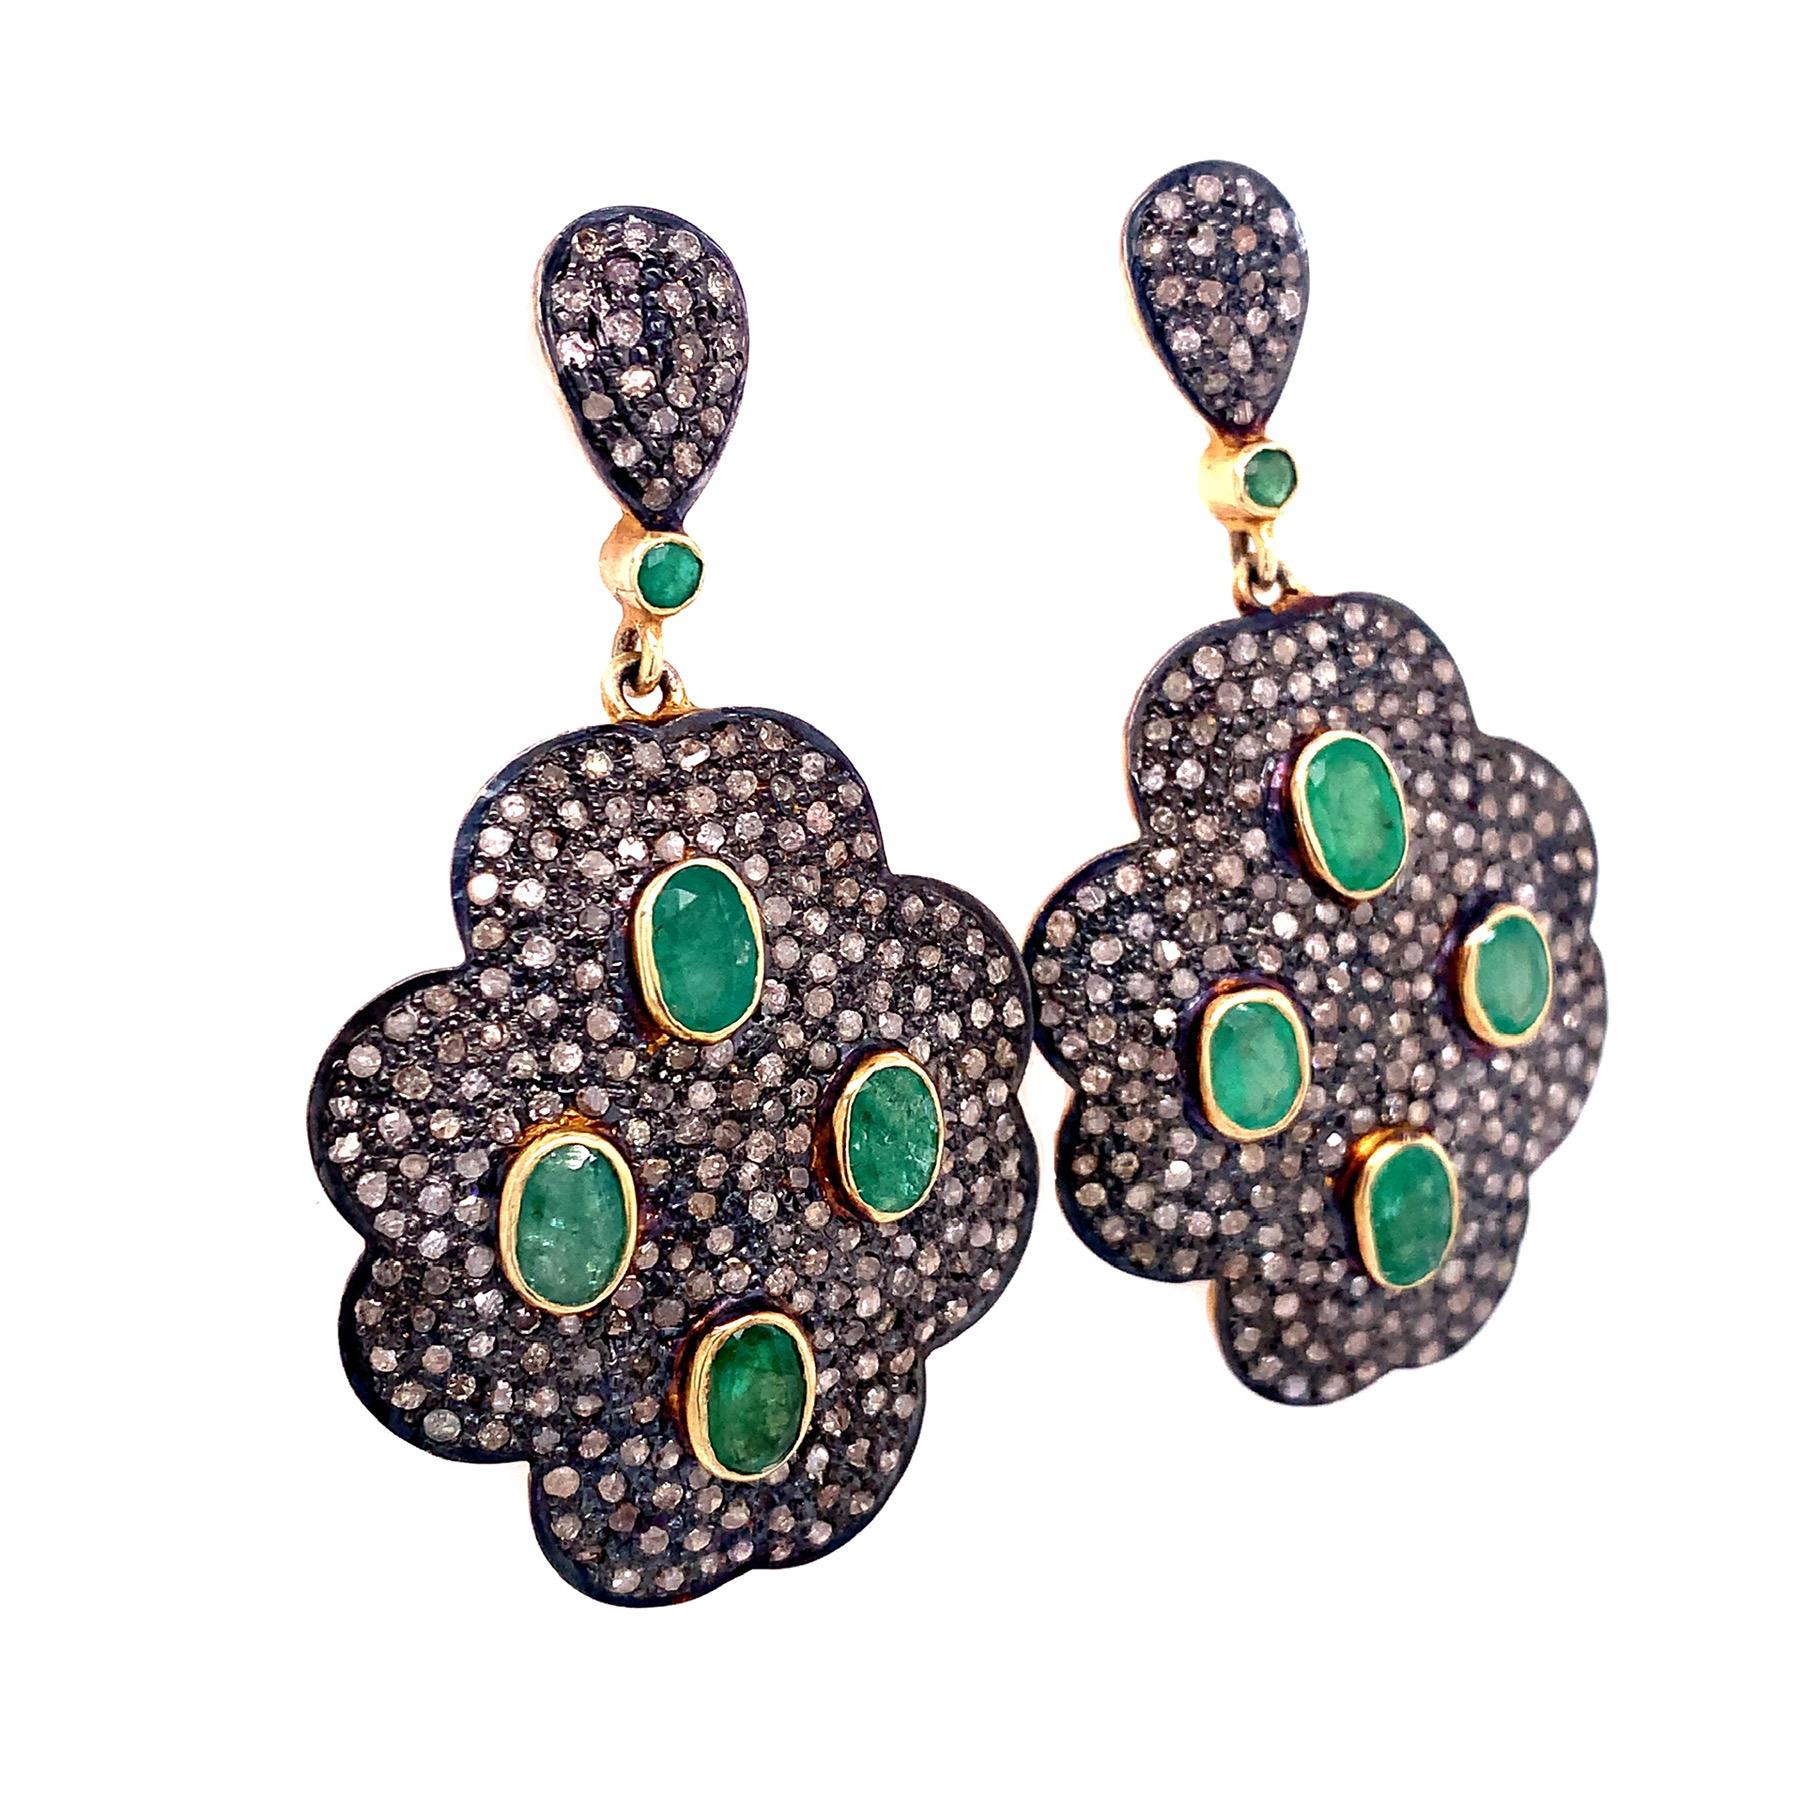 Life in color collection

Bright green oval shape Emeralds with rustic Diamonds dangle earring set in silver and 14k yellow gold plating.

Emerald : 3.65ct total weight.
Diamond : 3.76ct total weight.